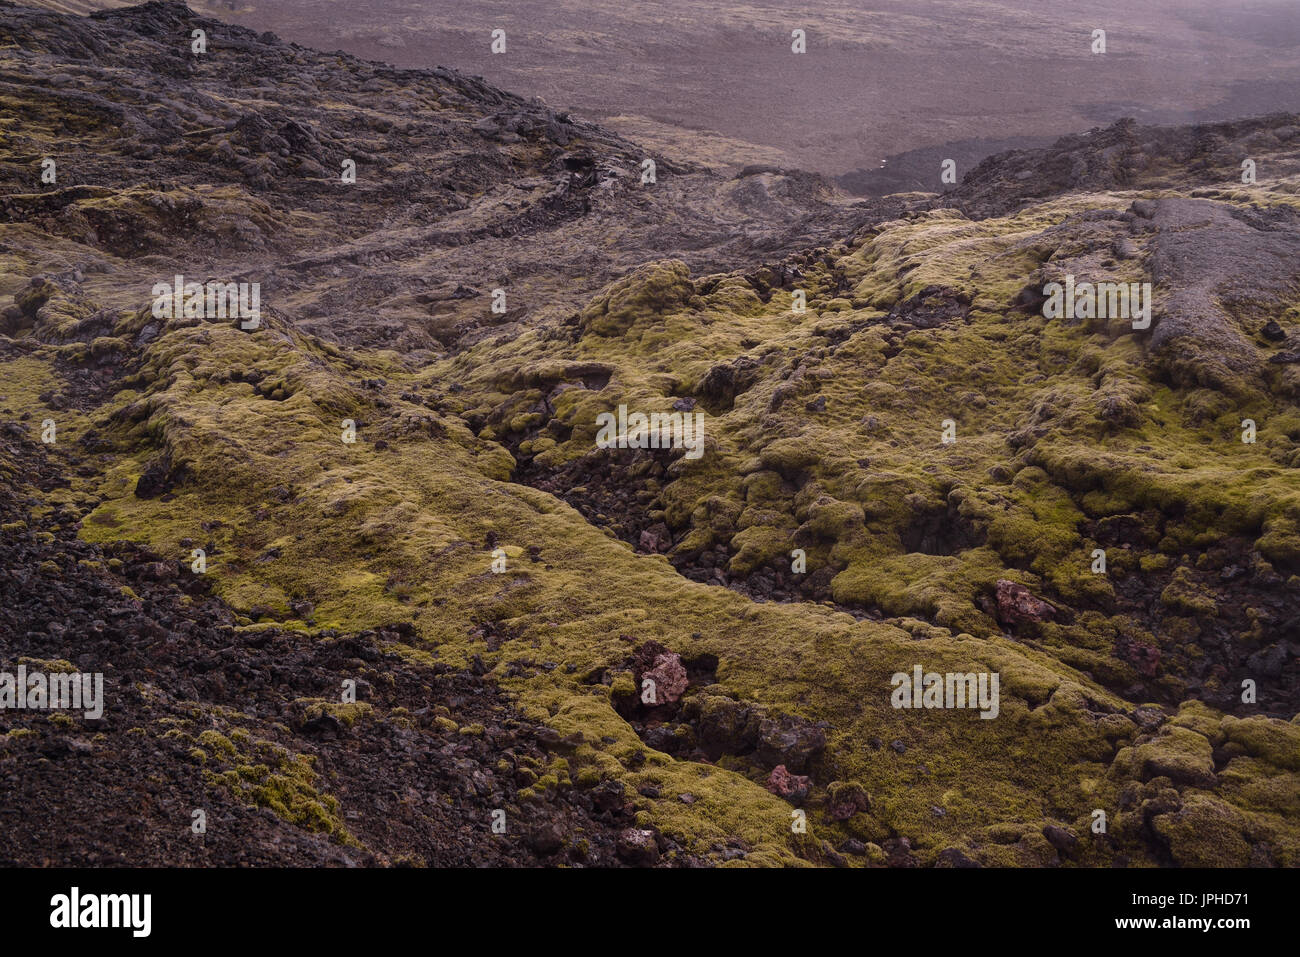 Moss growing on black hardened lavaflows at Krafla, Iceland. The site of a series of large volcanic eruptions in the 80s. Stock Photo